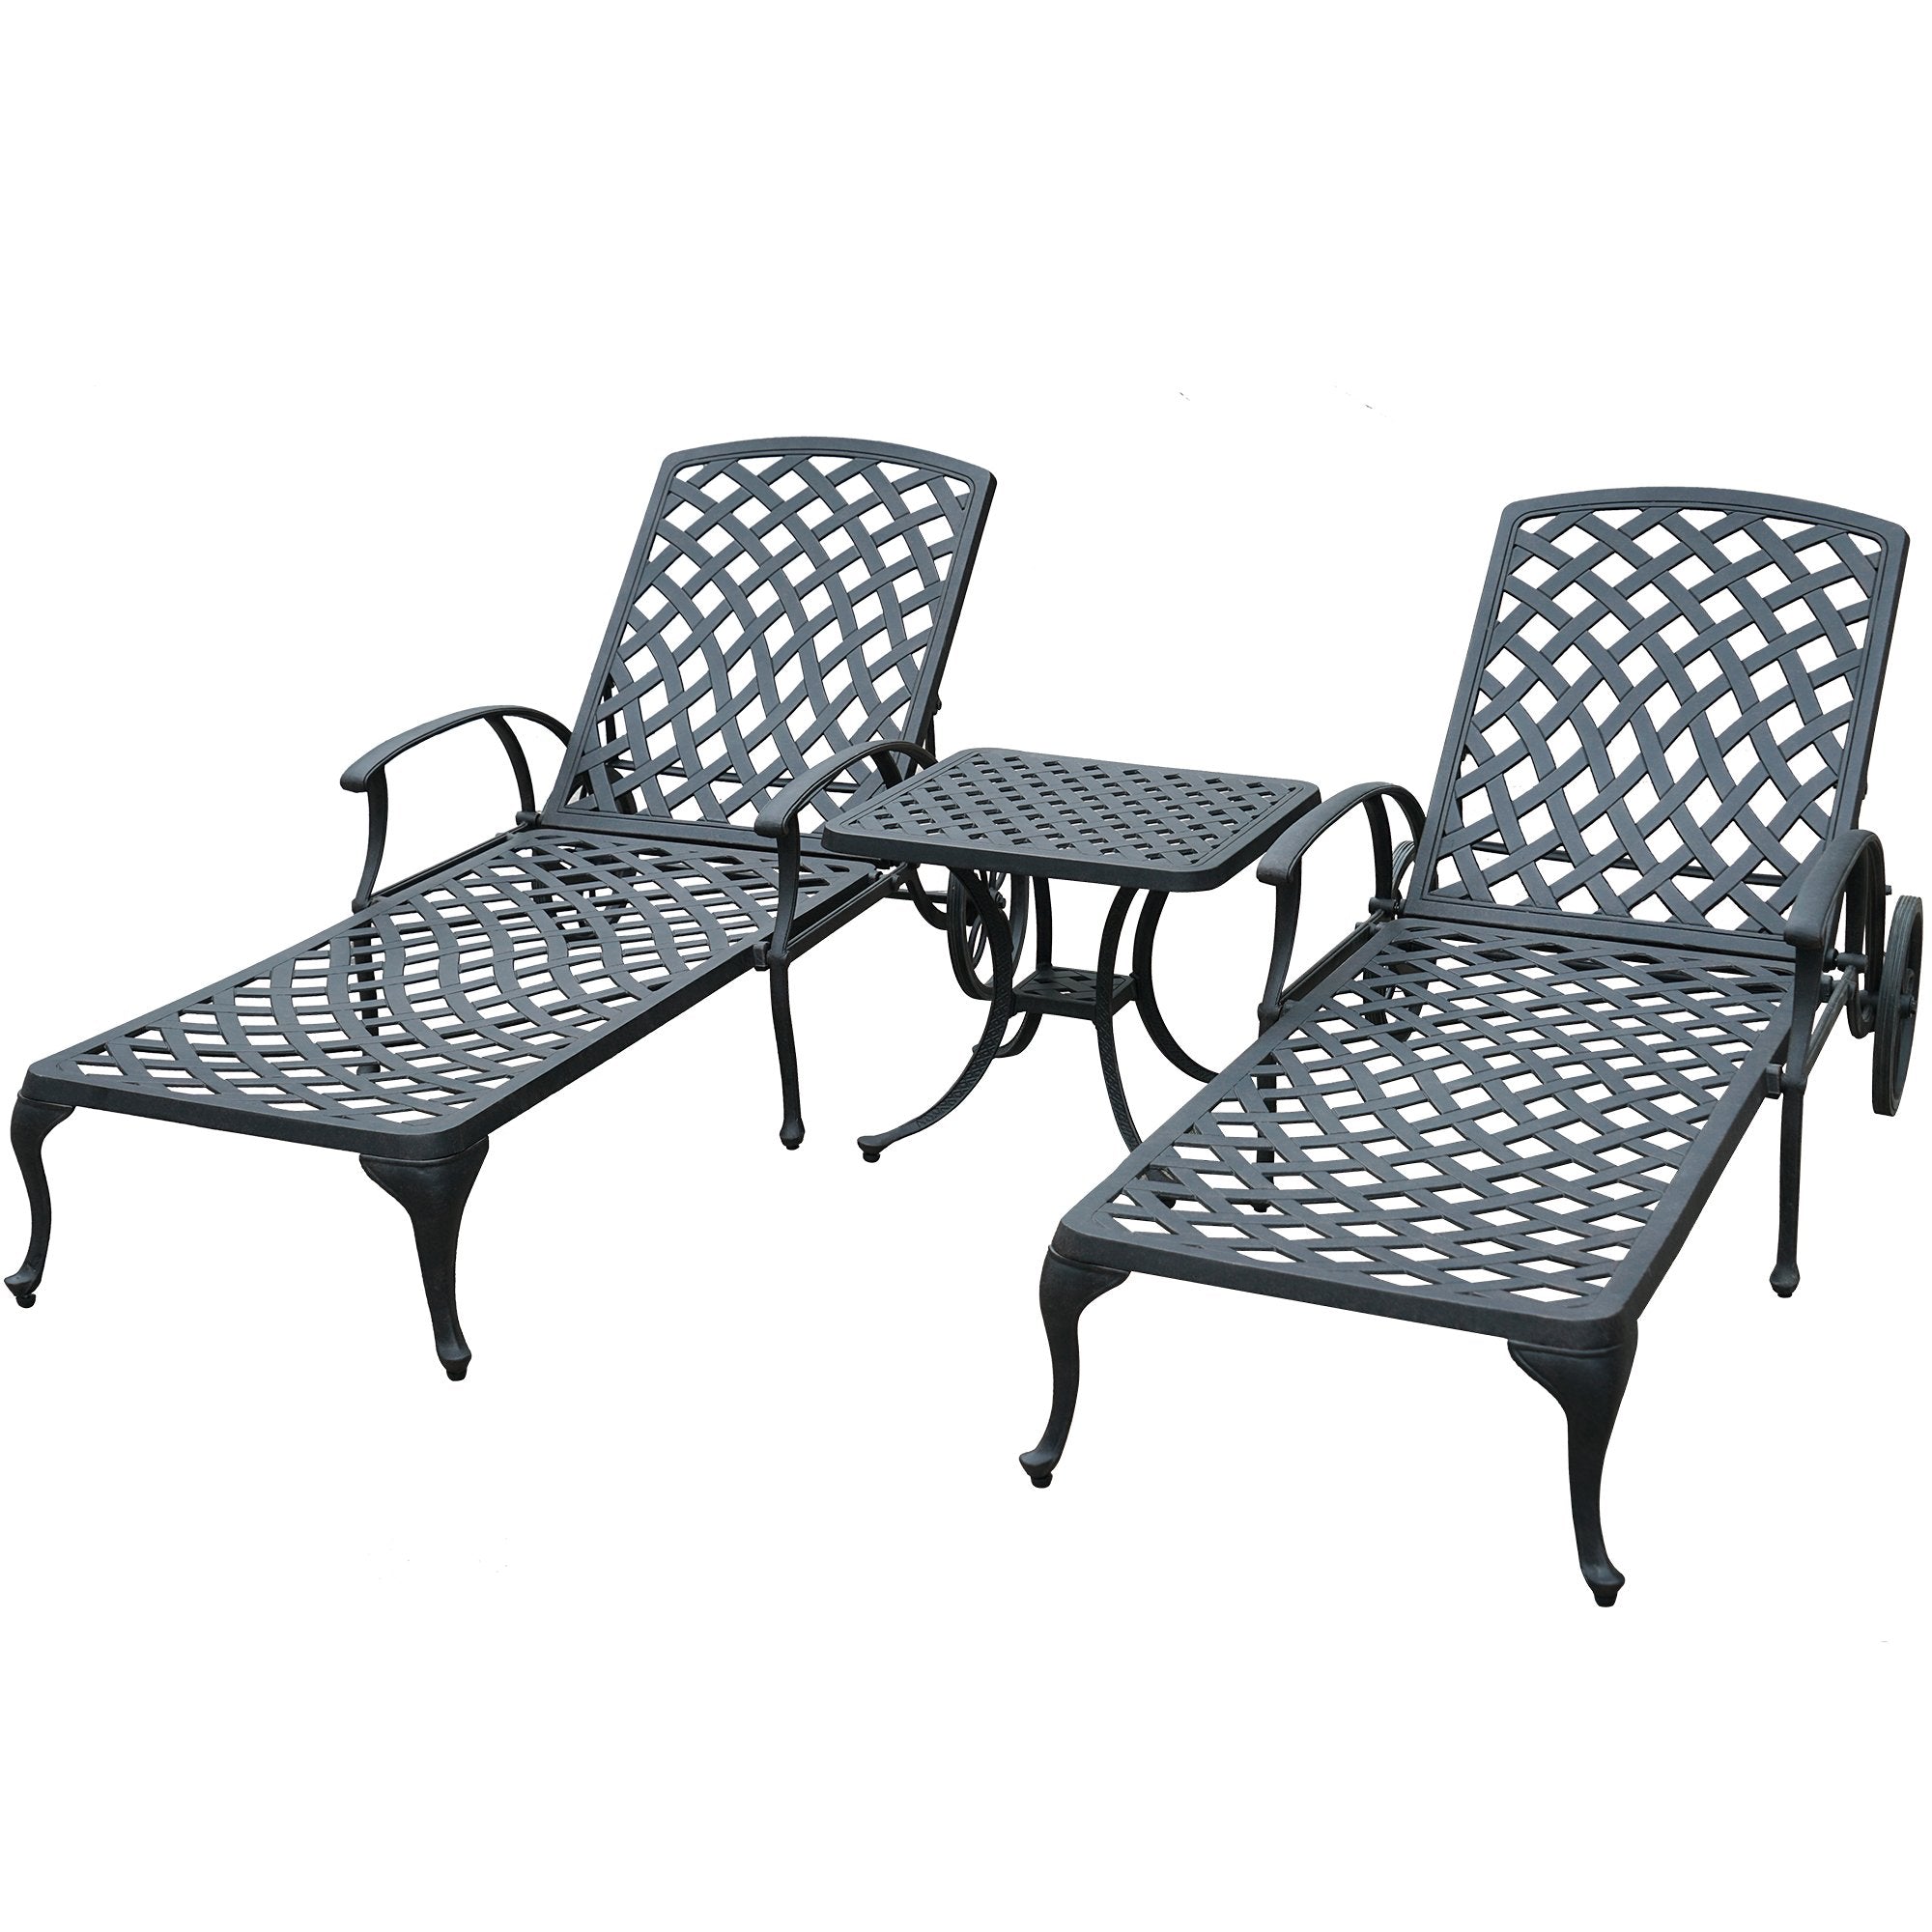 Antique Bronze Aluminum Reclining Outdoor Chaise Lounge with Wheels and Cushions in Red-Boyel Living